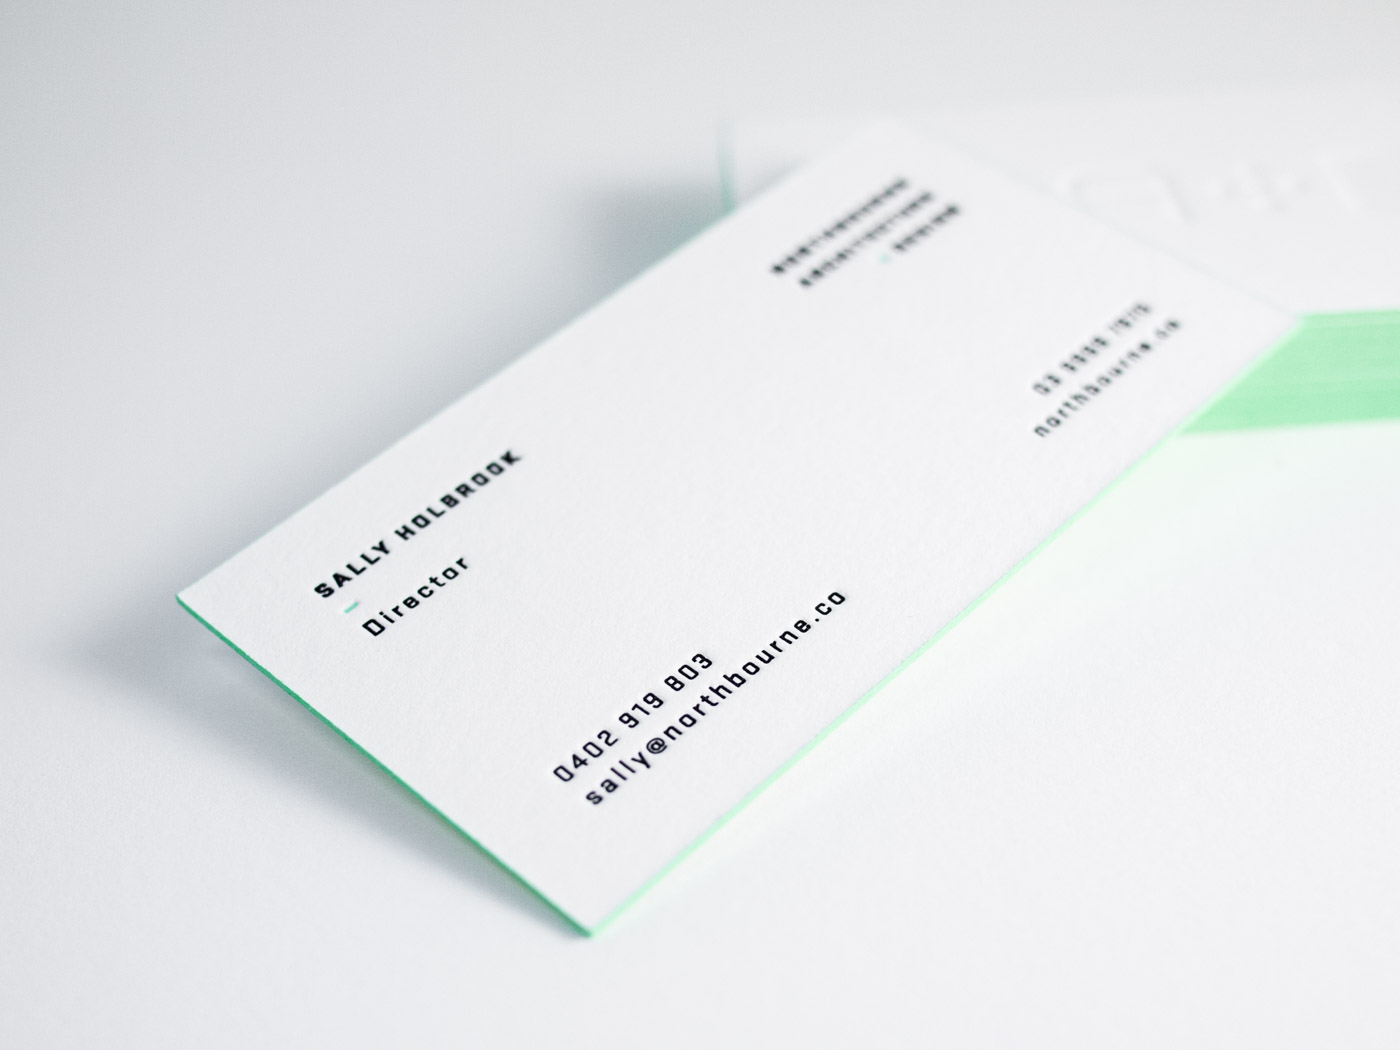 Northbourne Architecture | Printed by Parklife Press